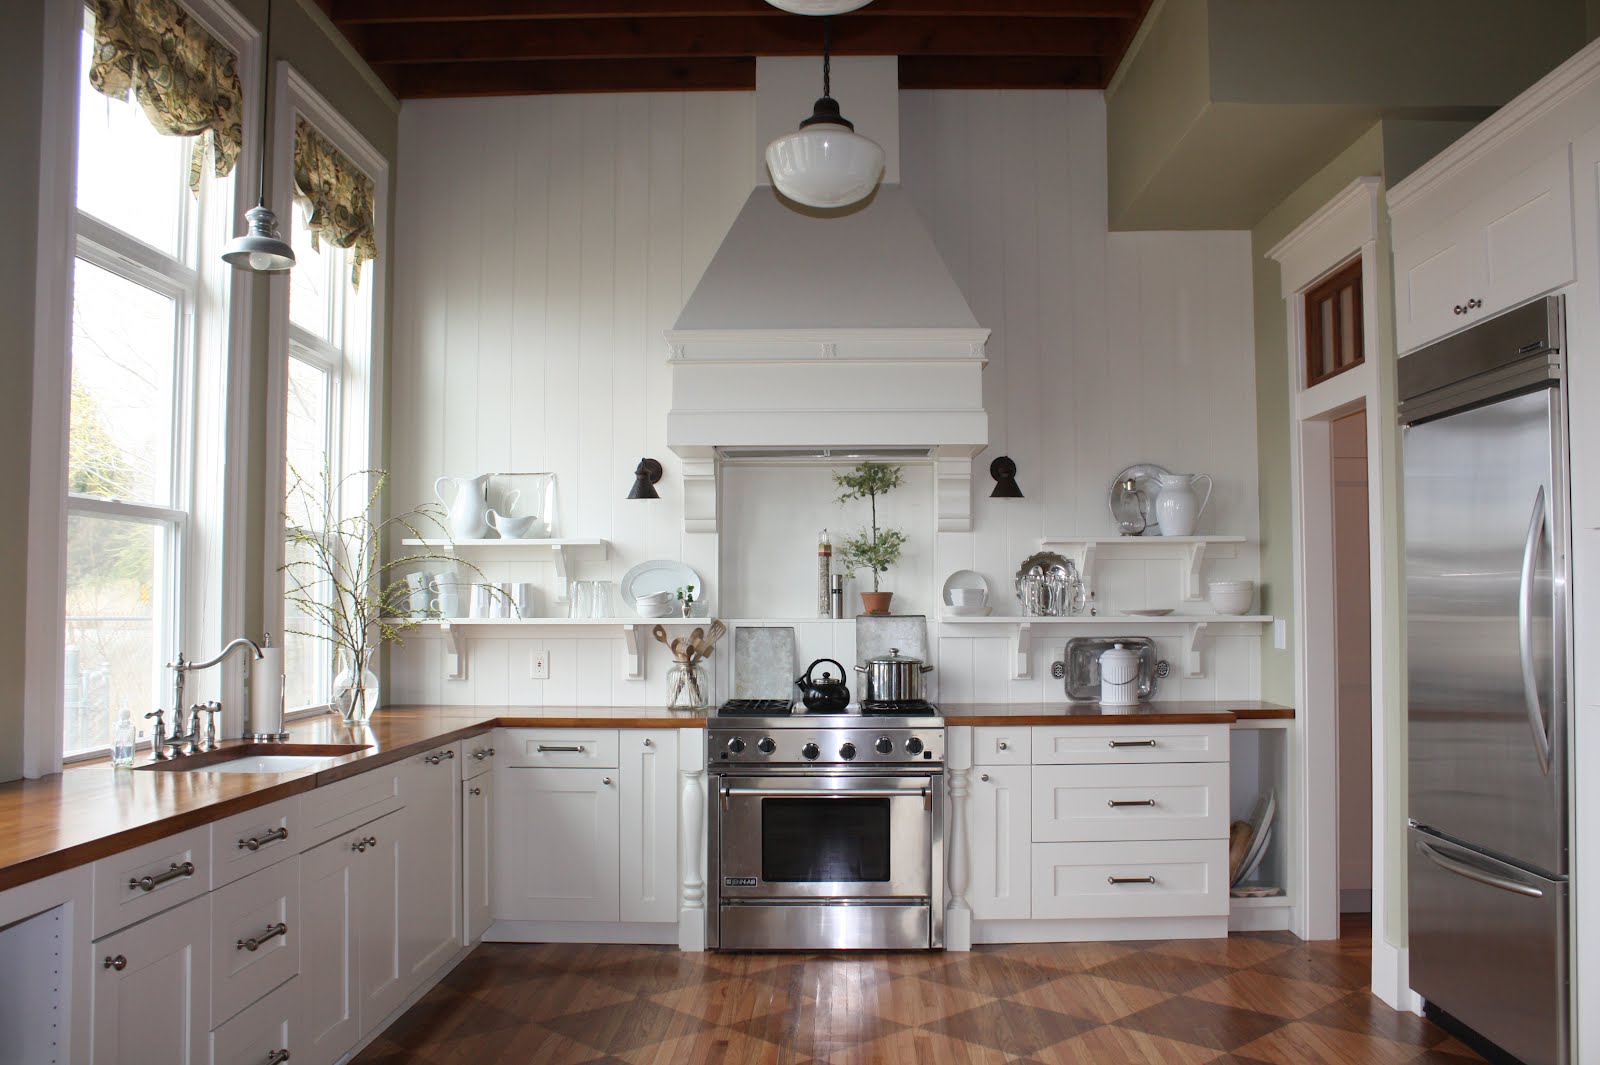 Favorite “Pin” Friday Kitchen Makeover from 1912 Home - Beneath My Heart